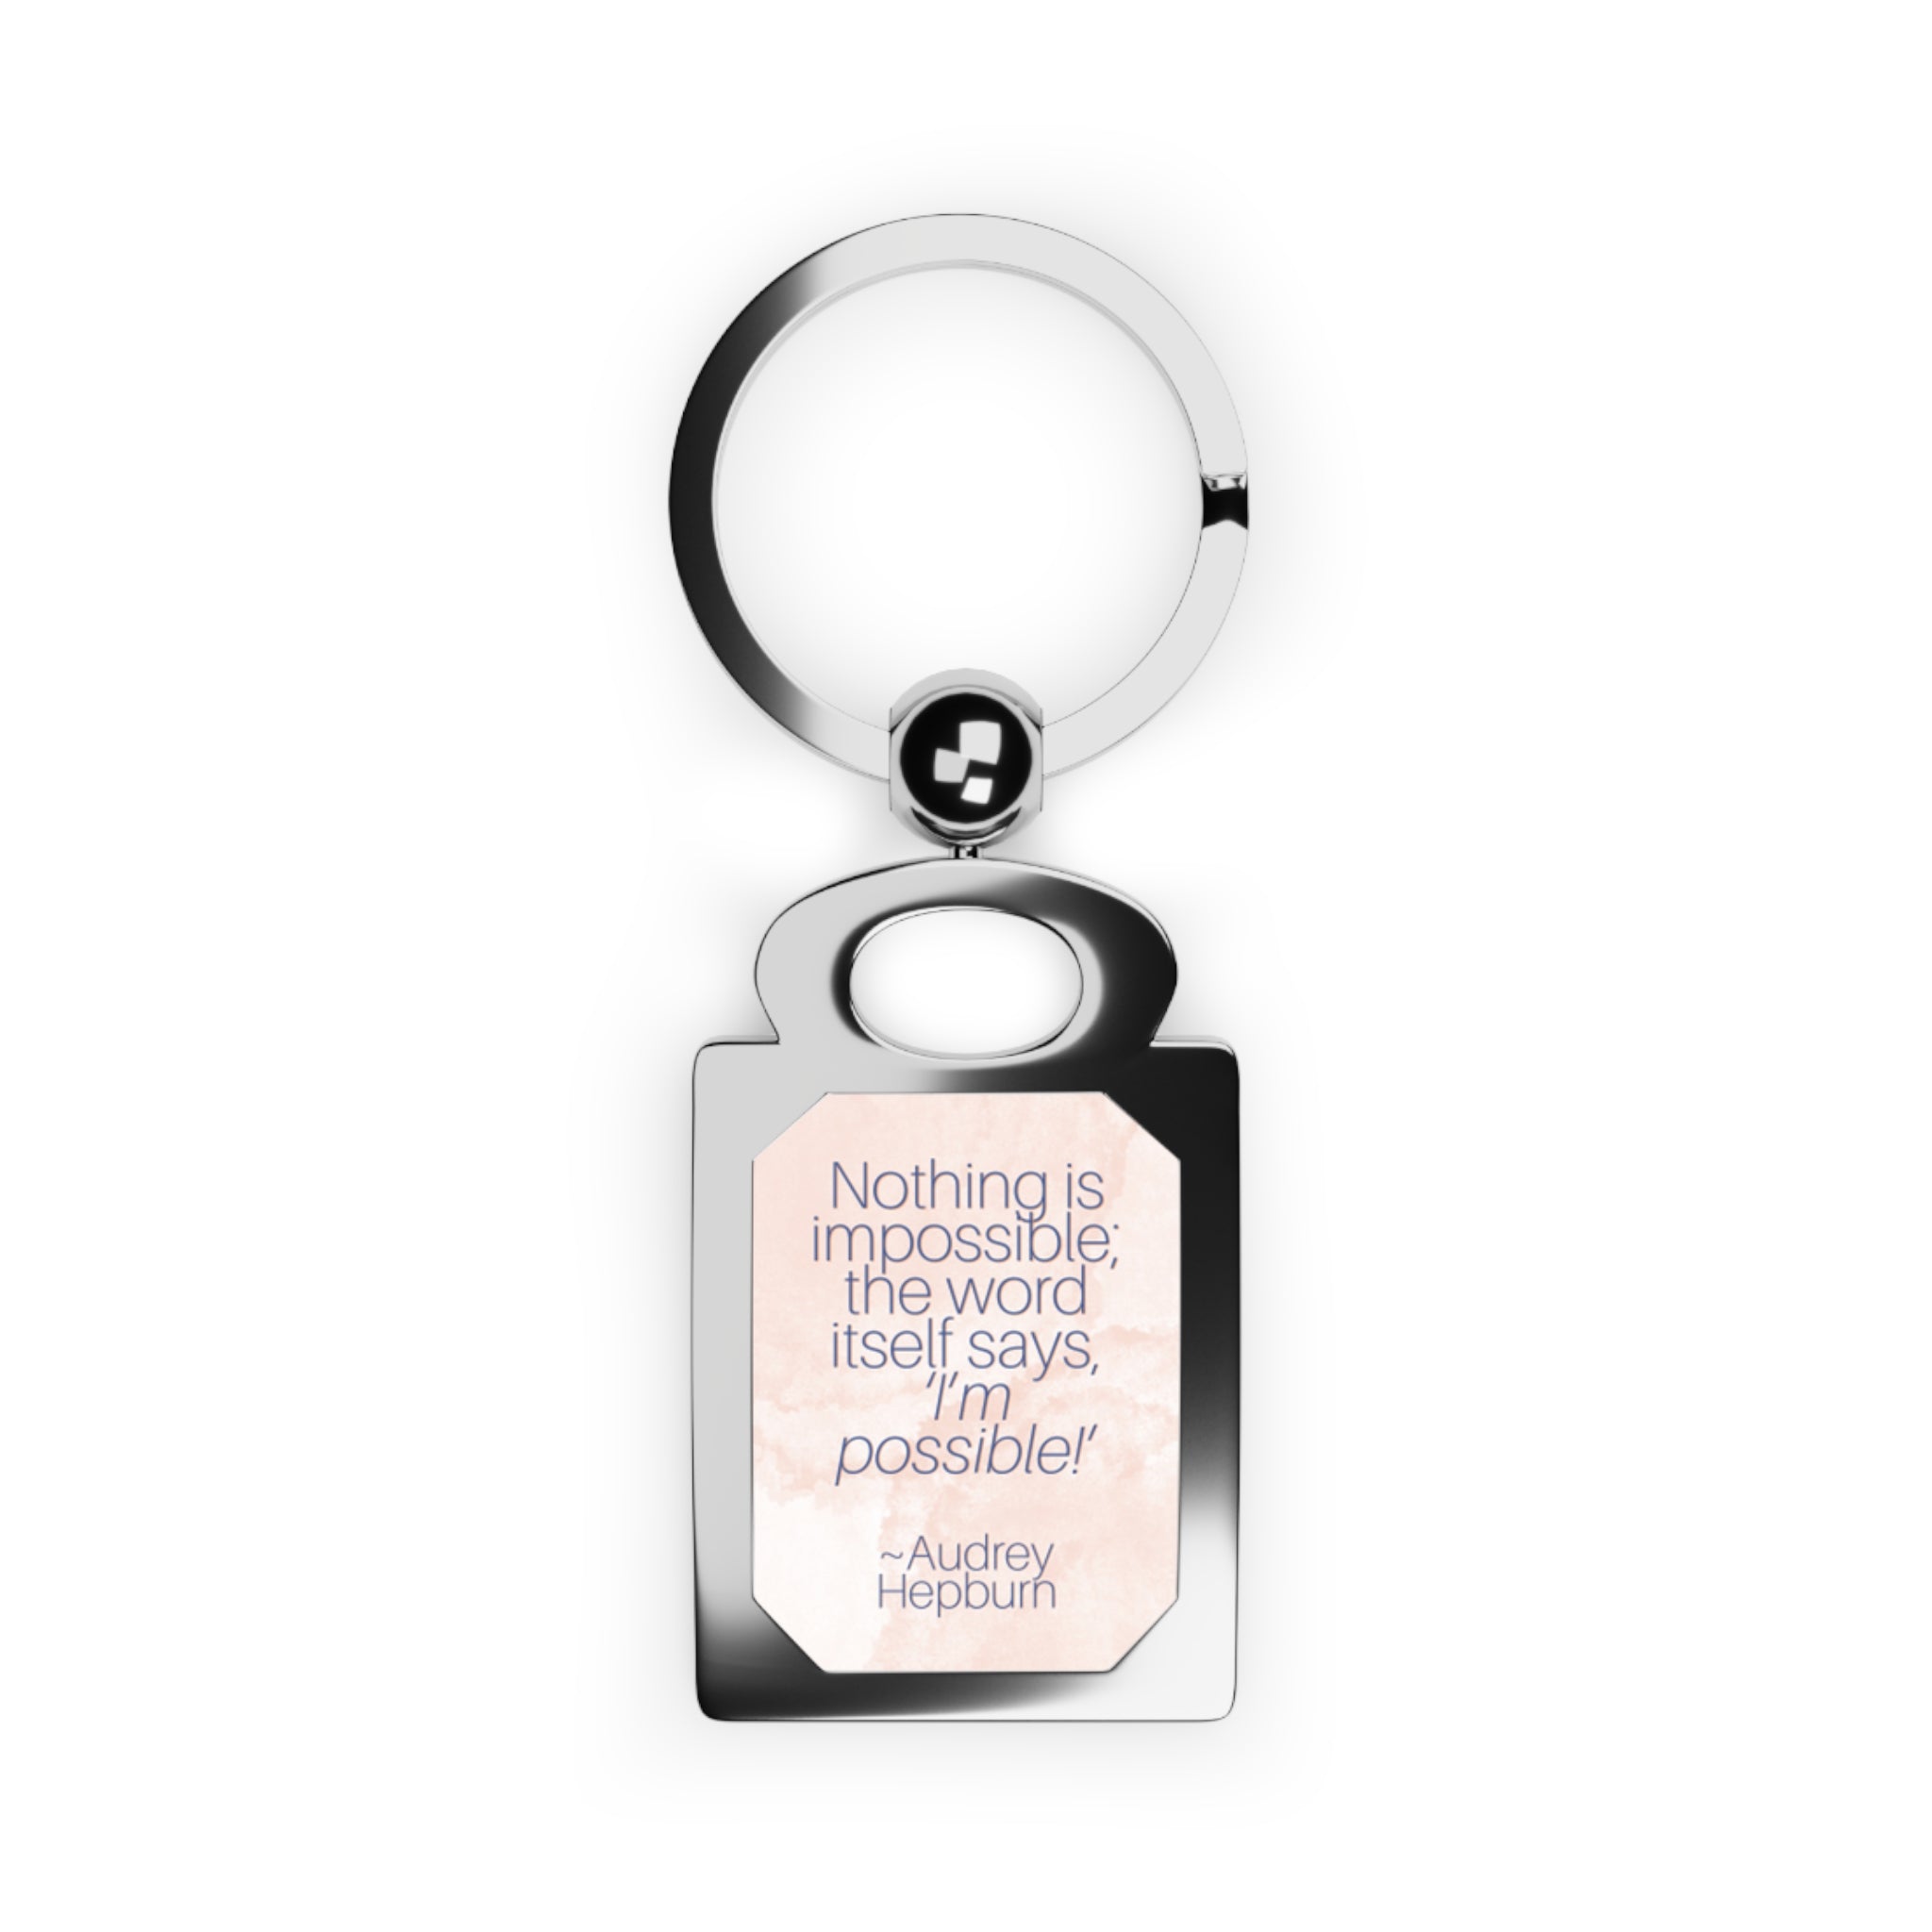 Keyring - "Nothing is impossible" - Audrey Hepburn quote